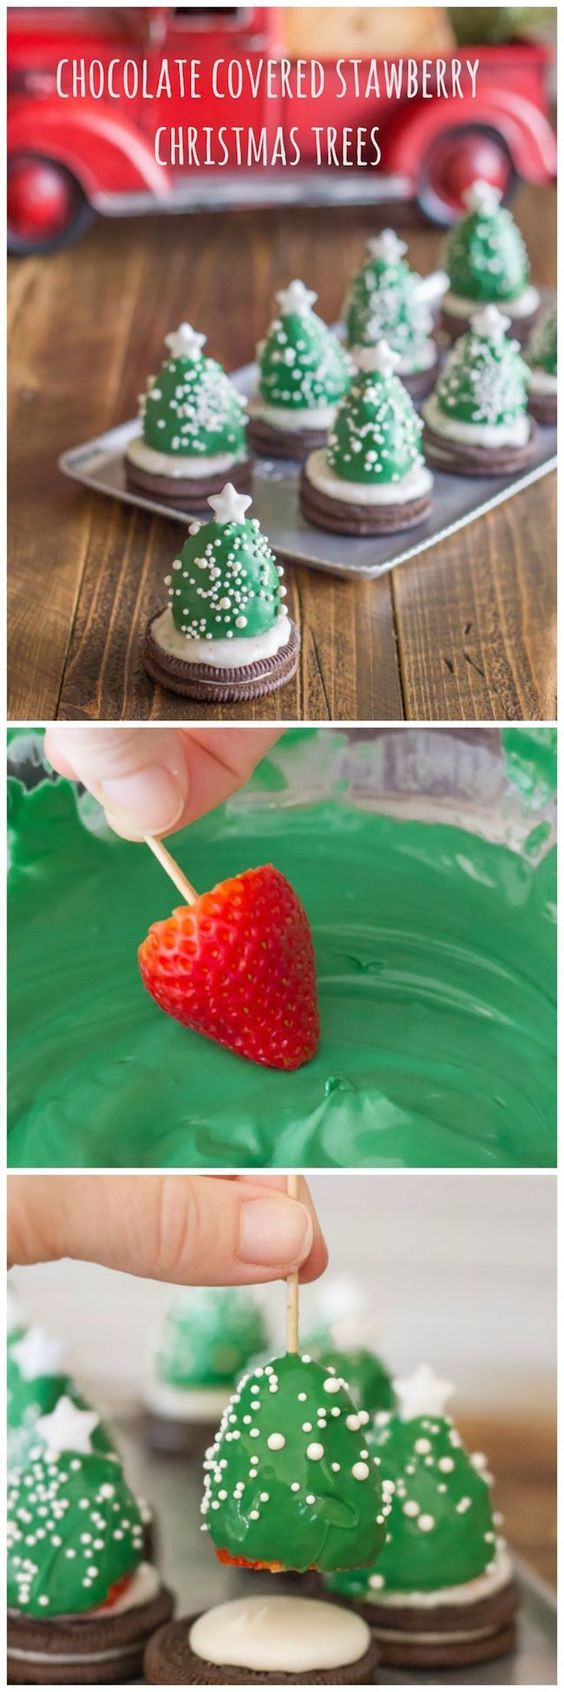 Pinterest Christmas Desserts
 Chocolate covered strawberry Christmas trees and 10 other